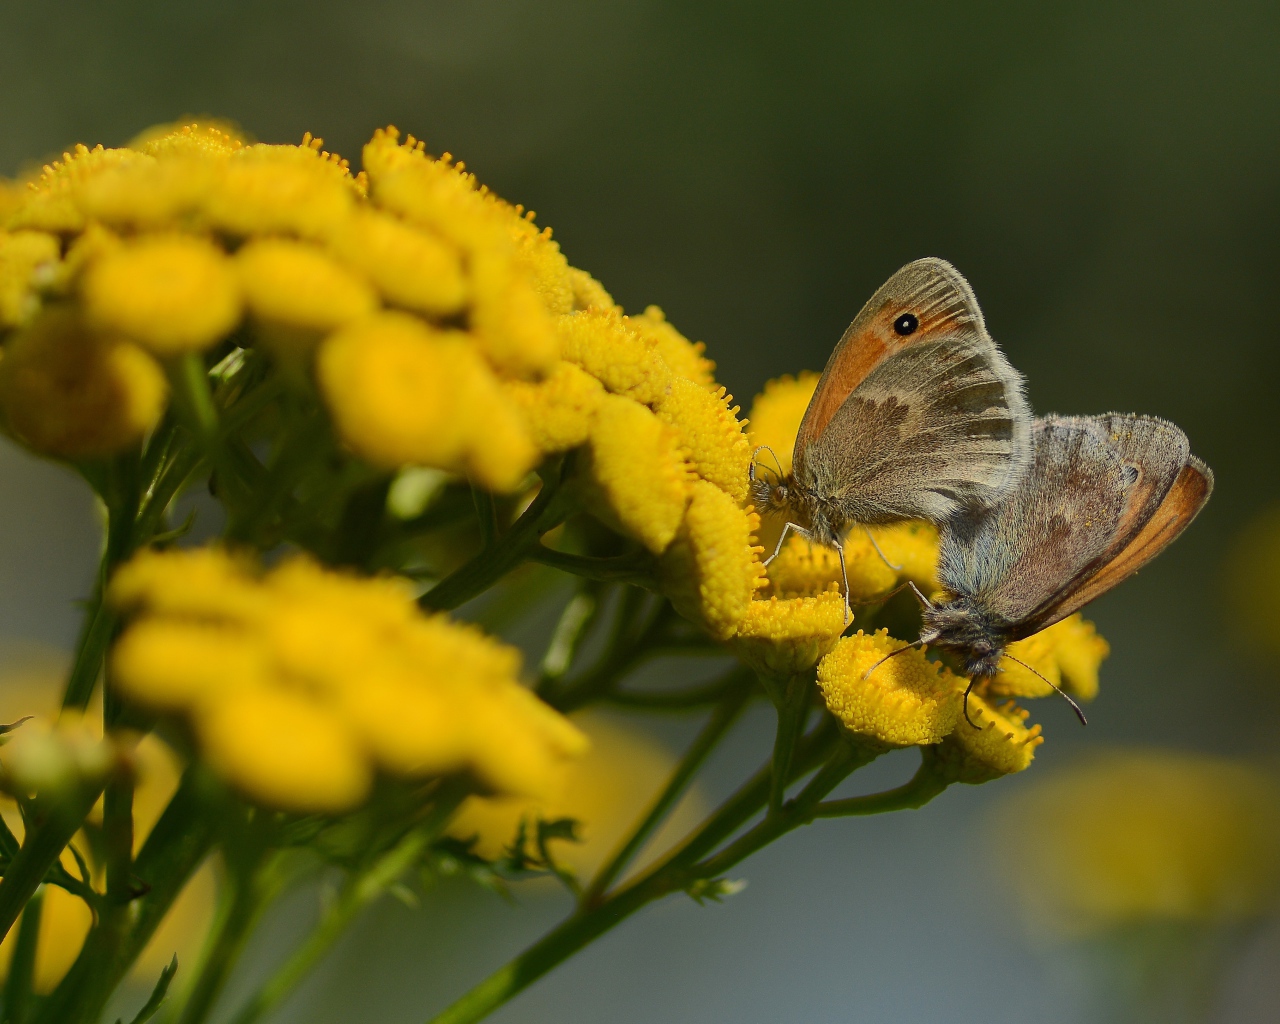 Two butterflies on yellow tansy flowers